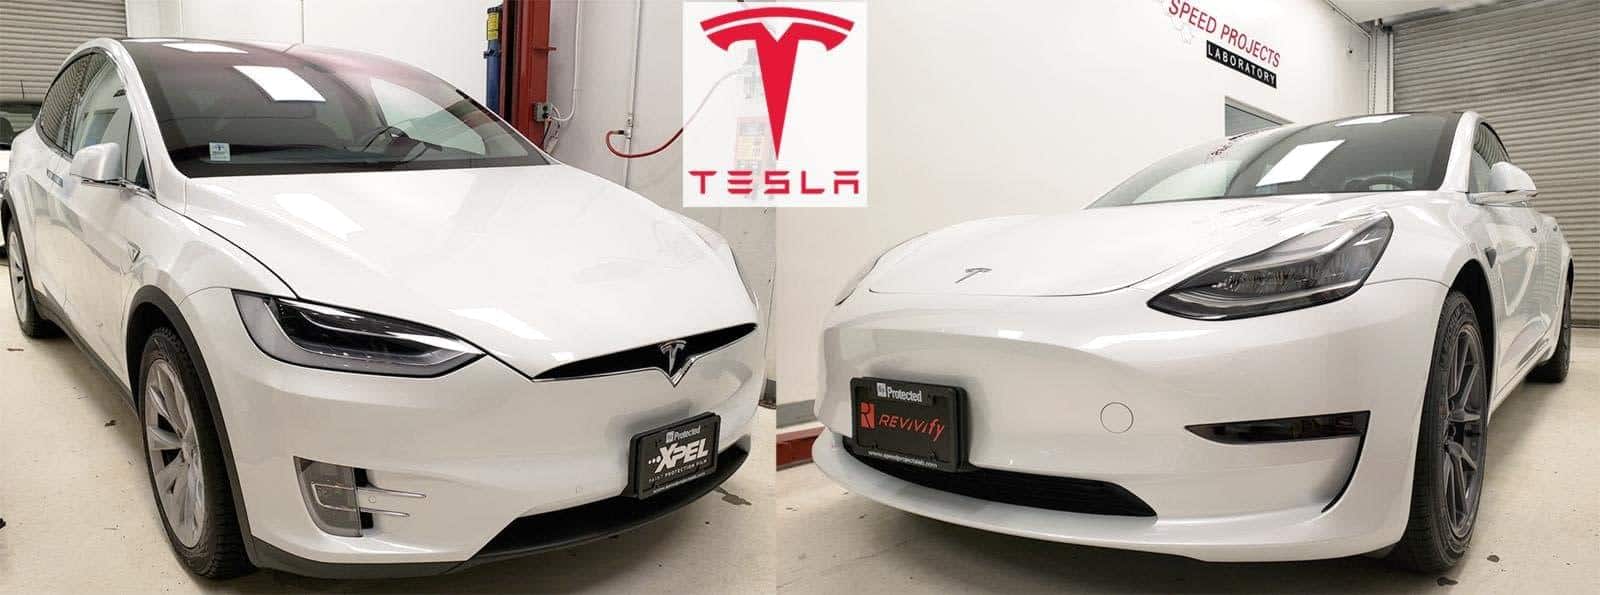 Tesla Model X and Model 3 paint protection film and ceramic coating installed at Speed Projects Lab in Richmond